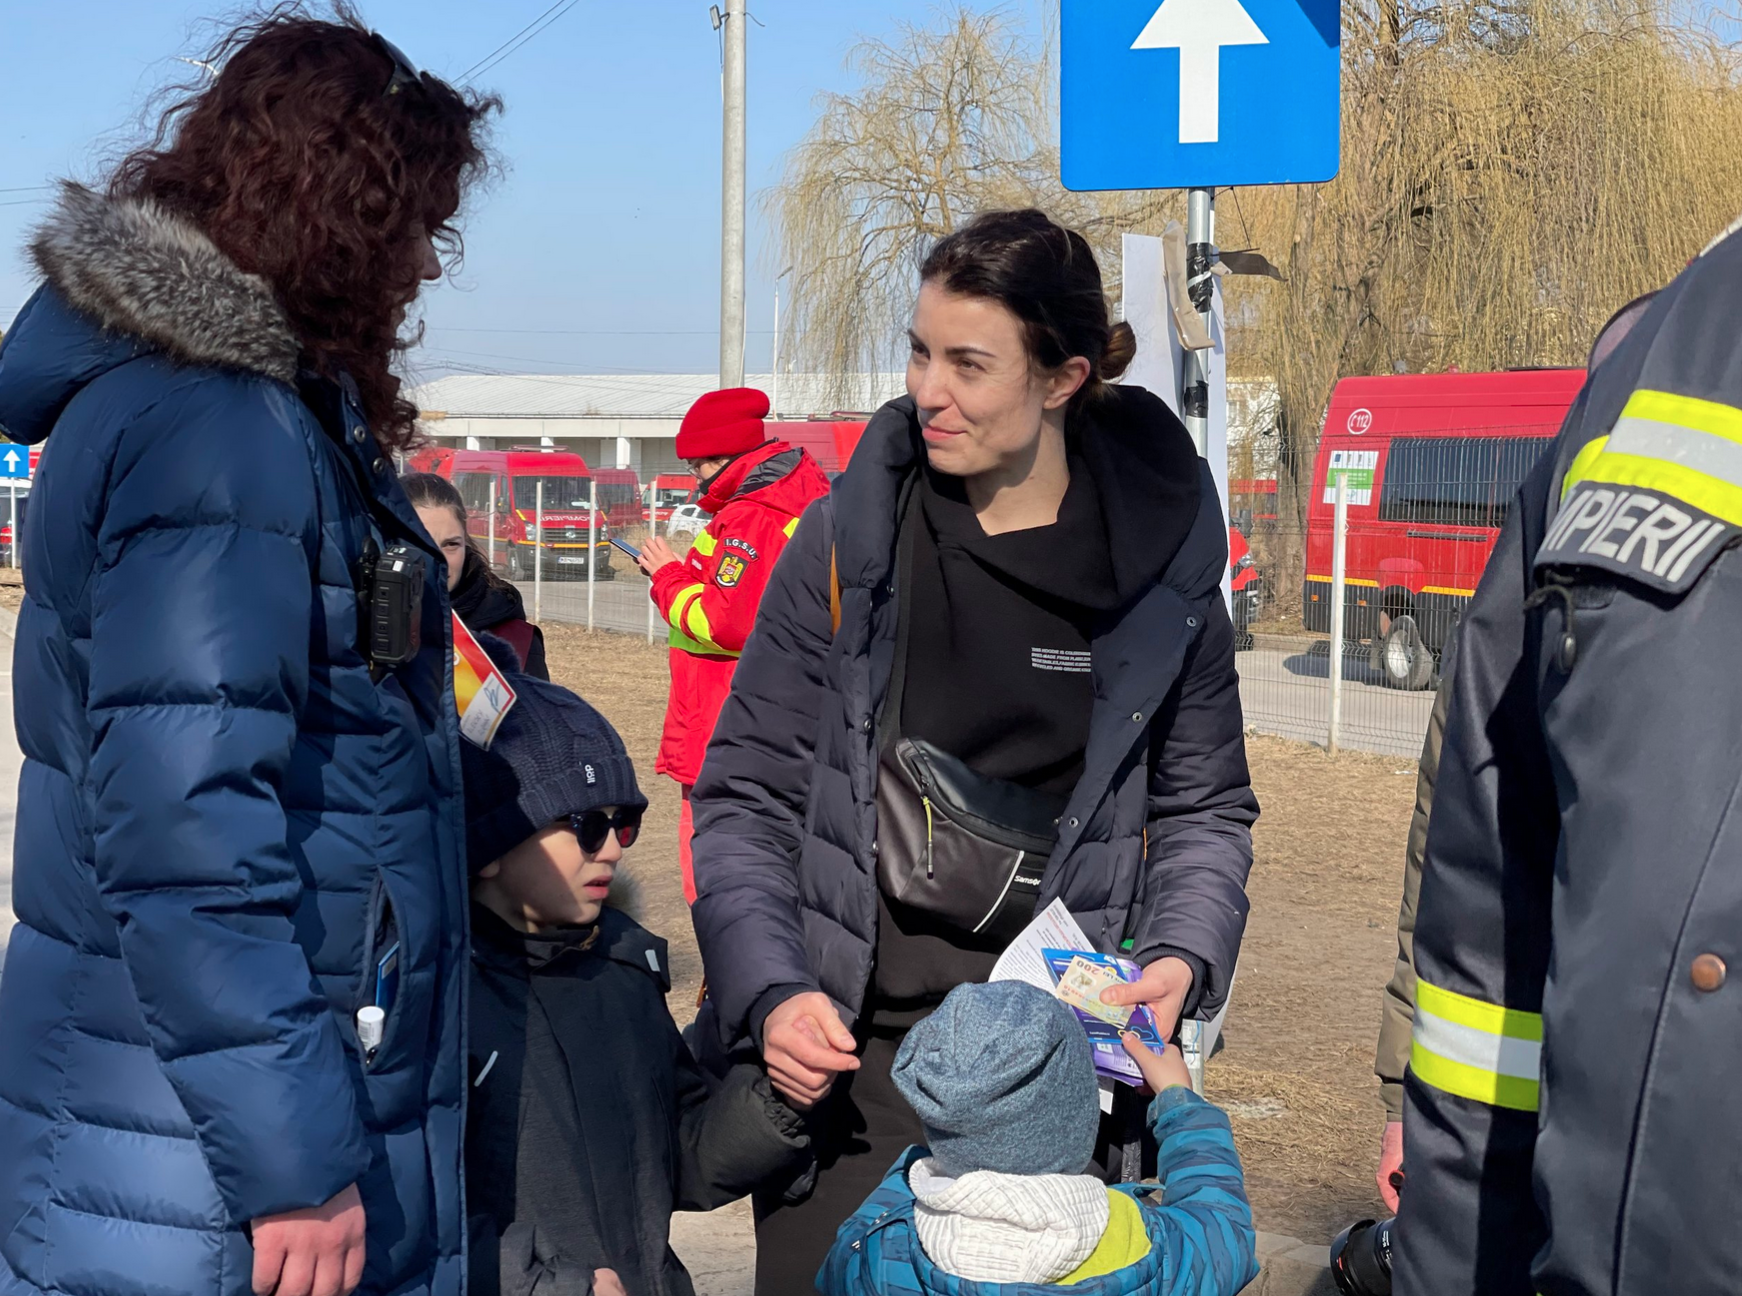 Cash For Refugees volunteer gives cash to Ukrainian mother with two kids at Romanian border